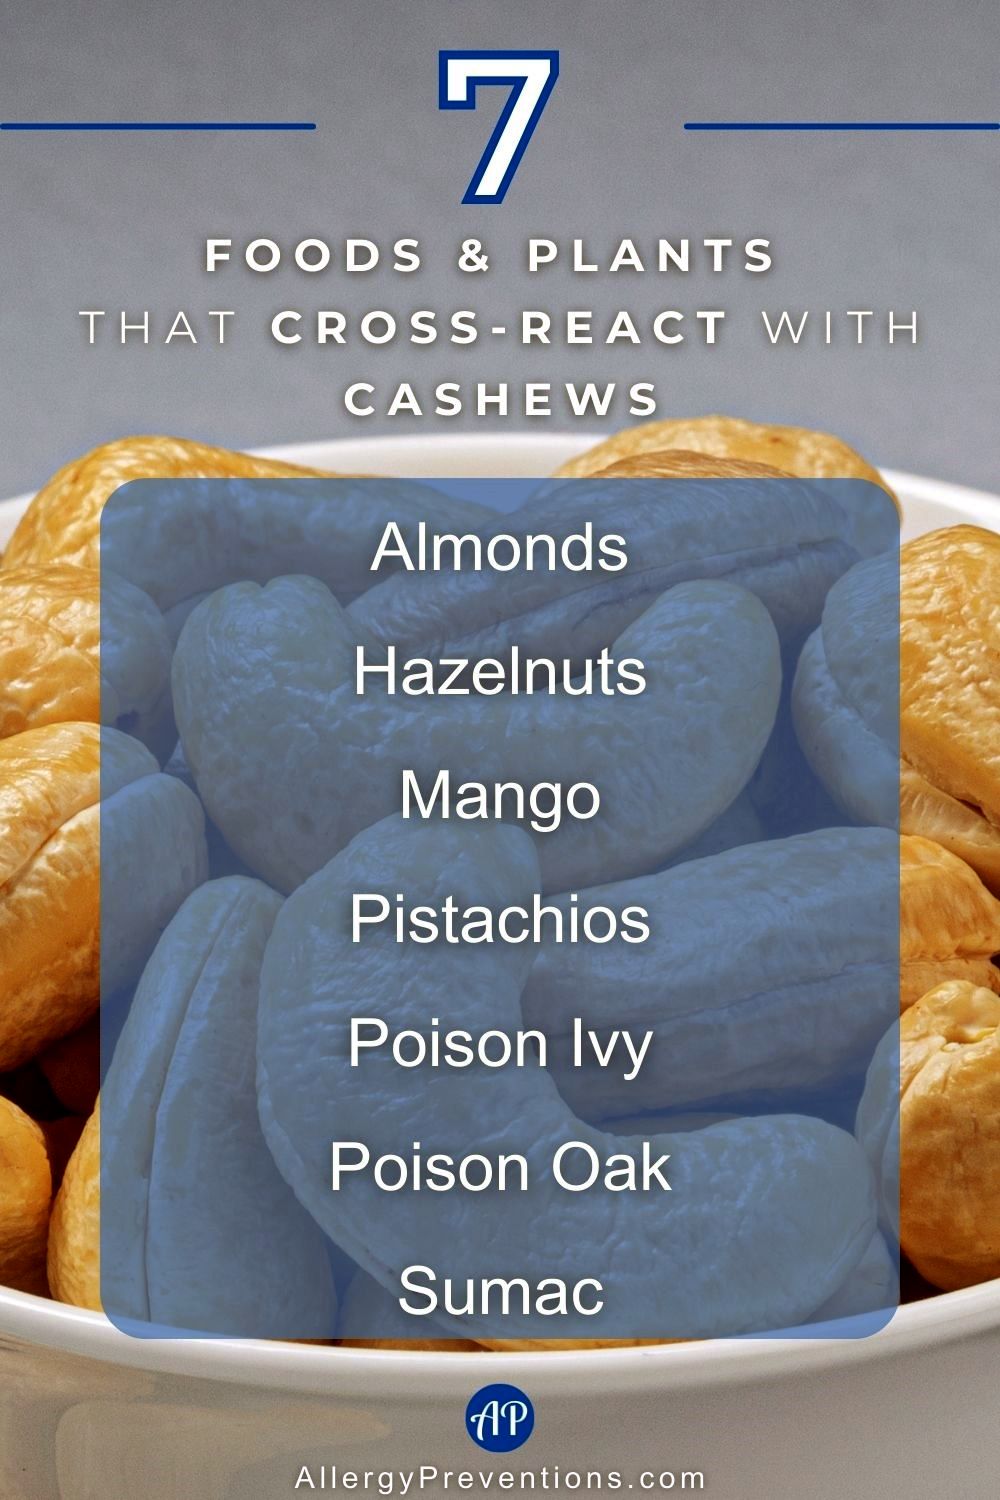 Foods and plants that cross-react with cashews infographic. With a cashew allergy, it is important to know which foods have cross-reactivity, which includes: almonds, hazelnuts, mango, pistachios, poison ivy, poison oak, and sumac.